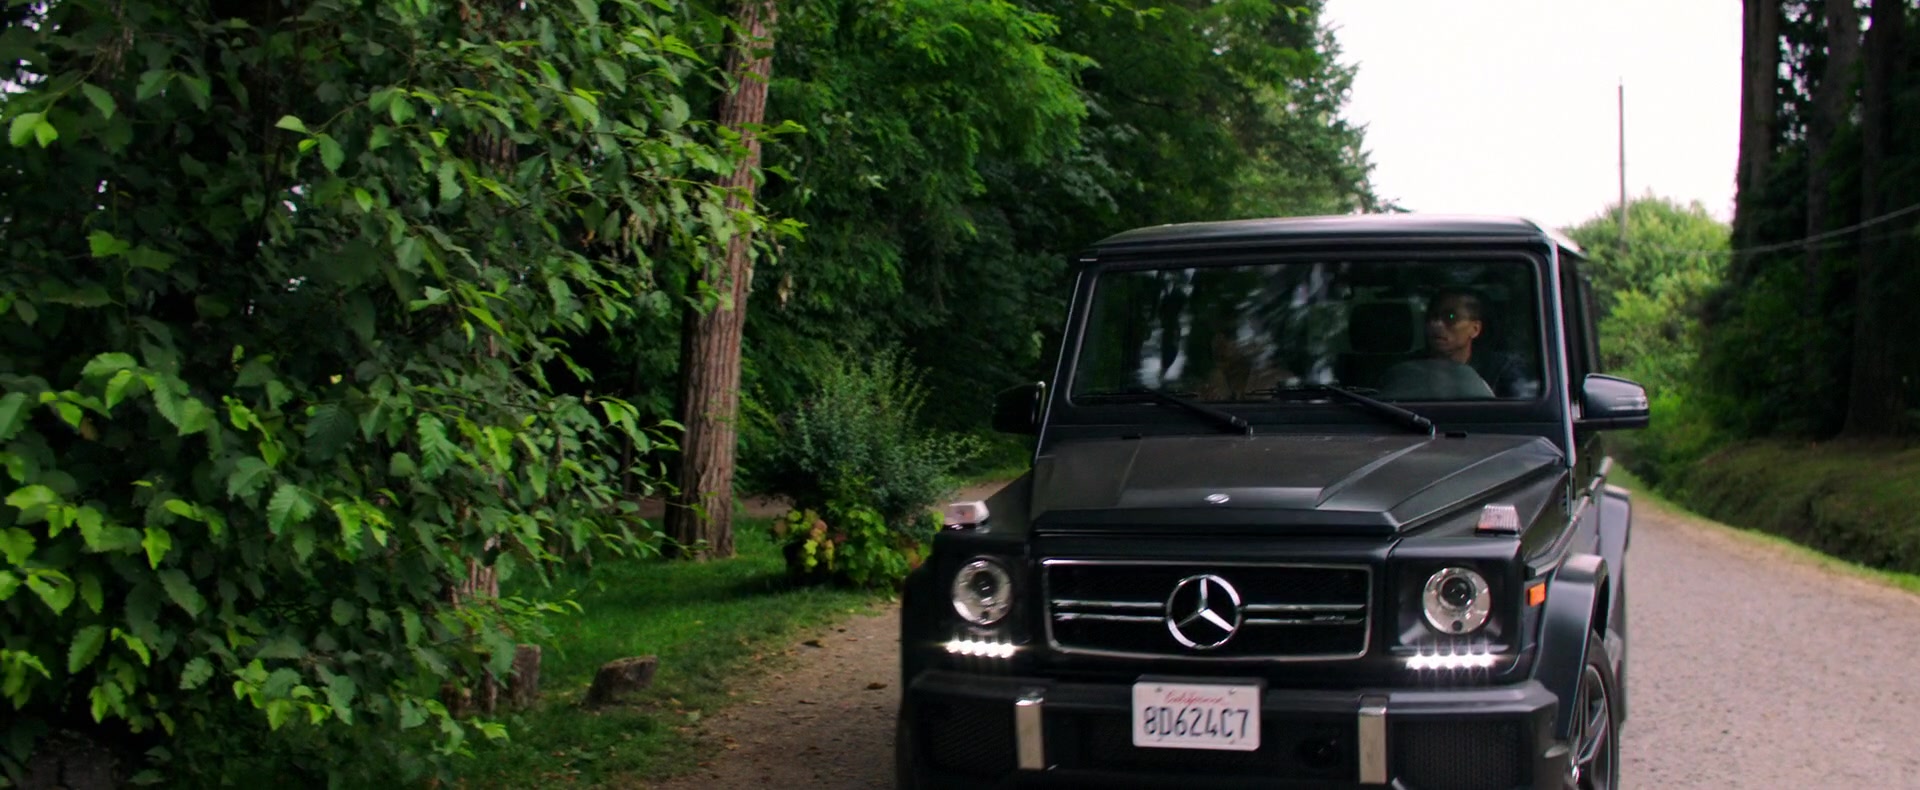 Mercedes Benz G63 Amg Suv Used By Michael Ealy In The